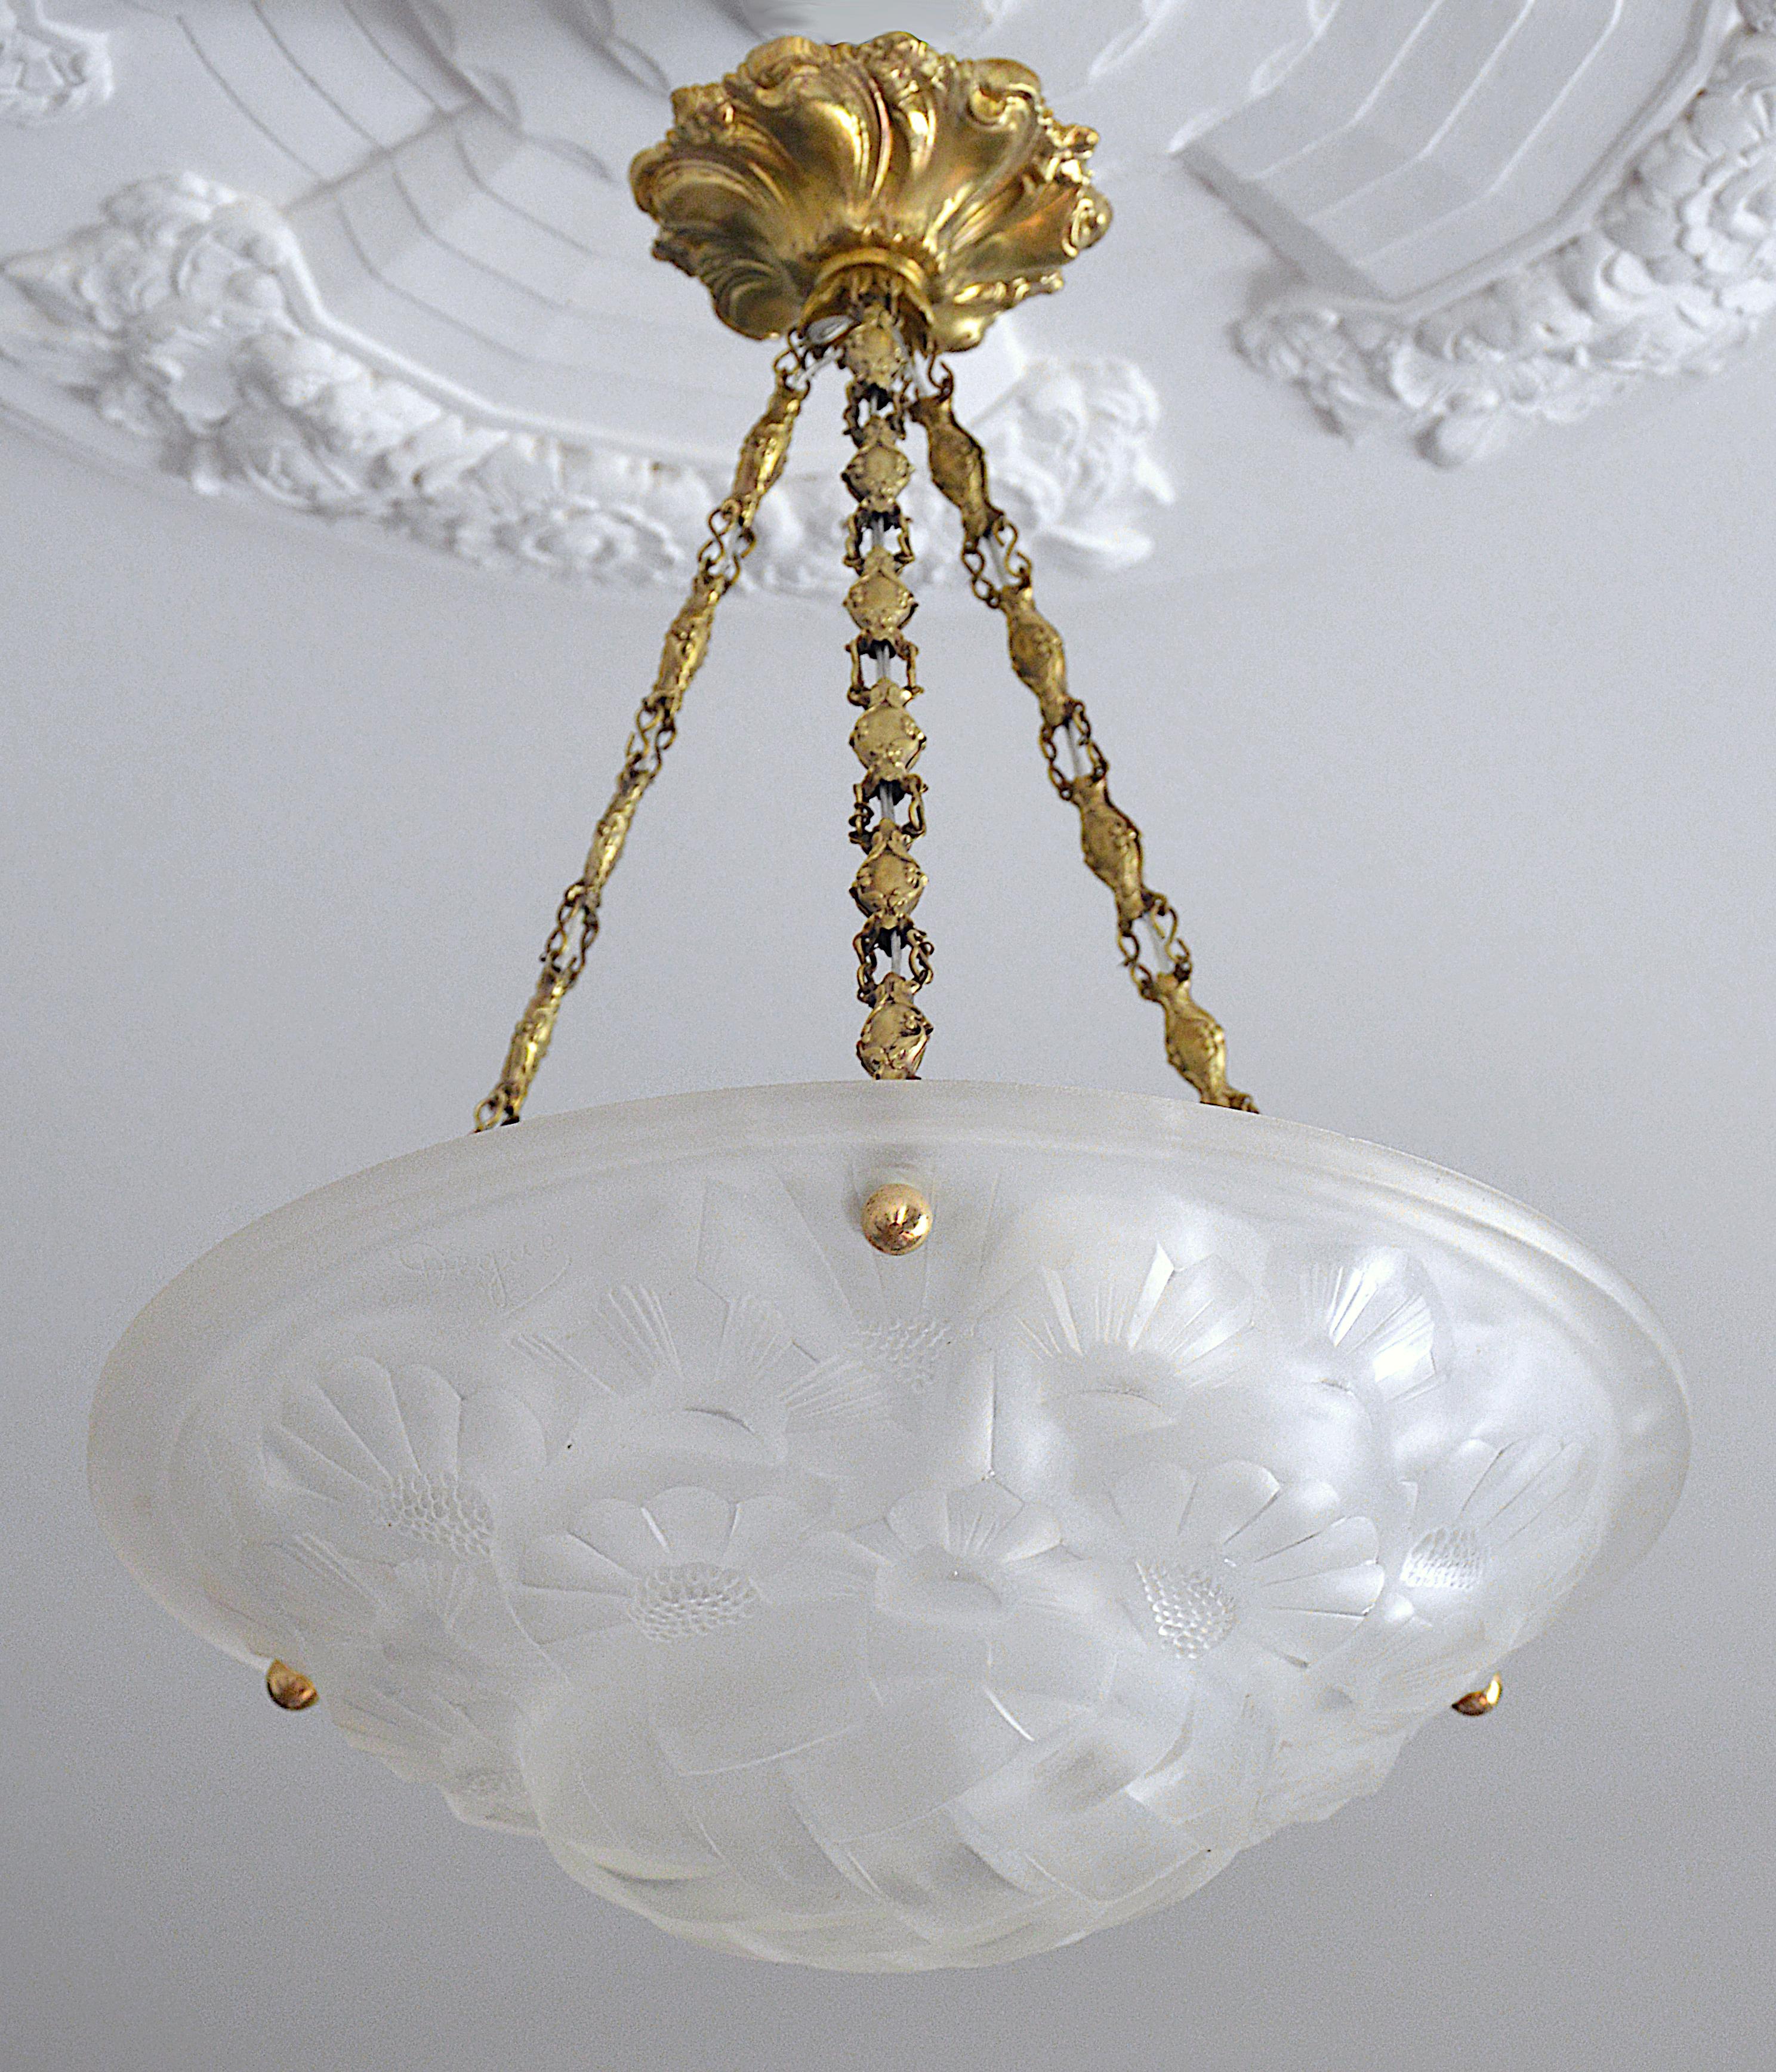 Degue French Art Deco Pair of Pendants Chandeliers, Ca. 1930 For Sale 2